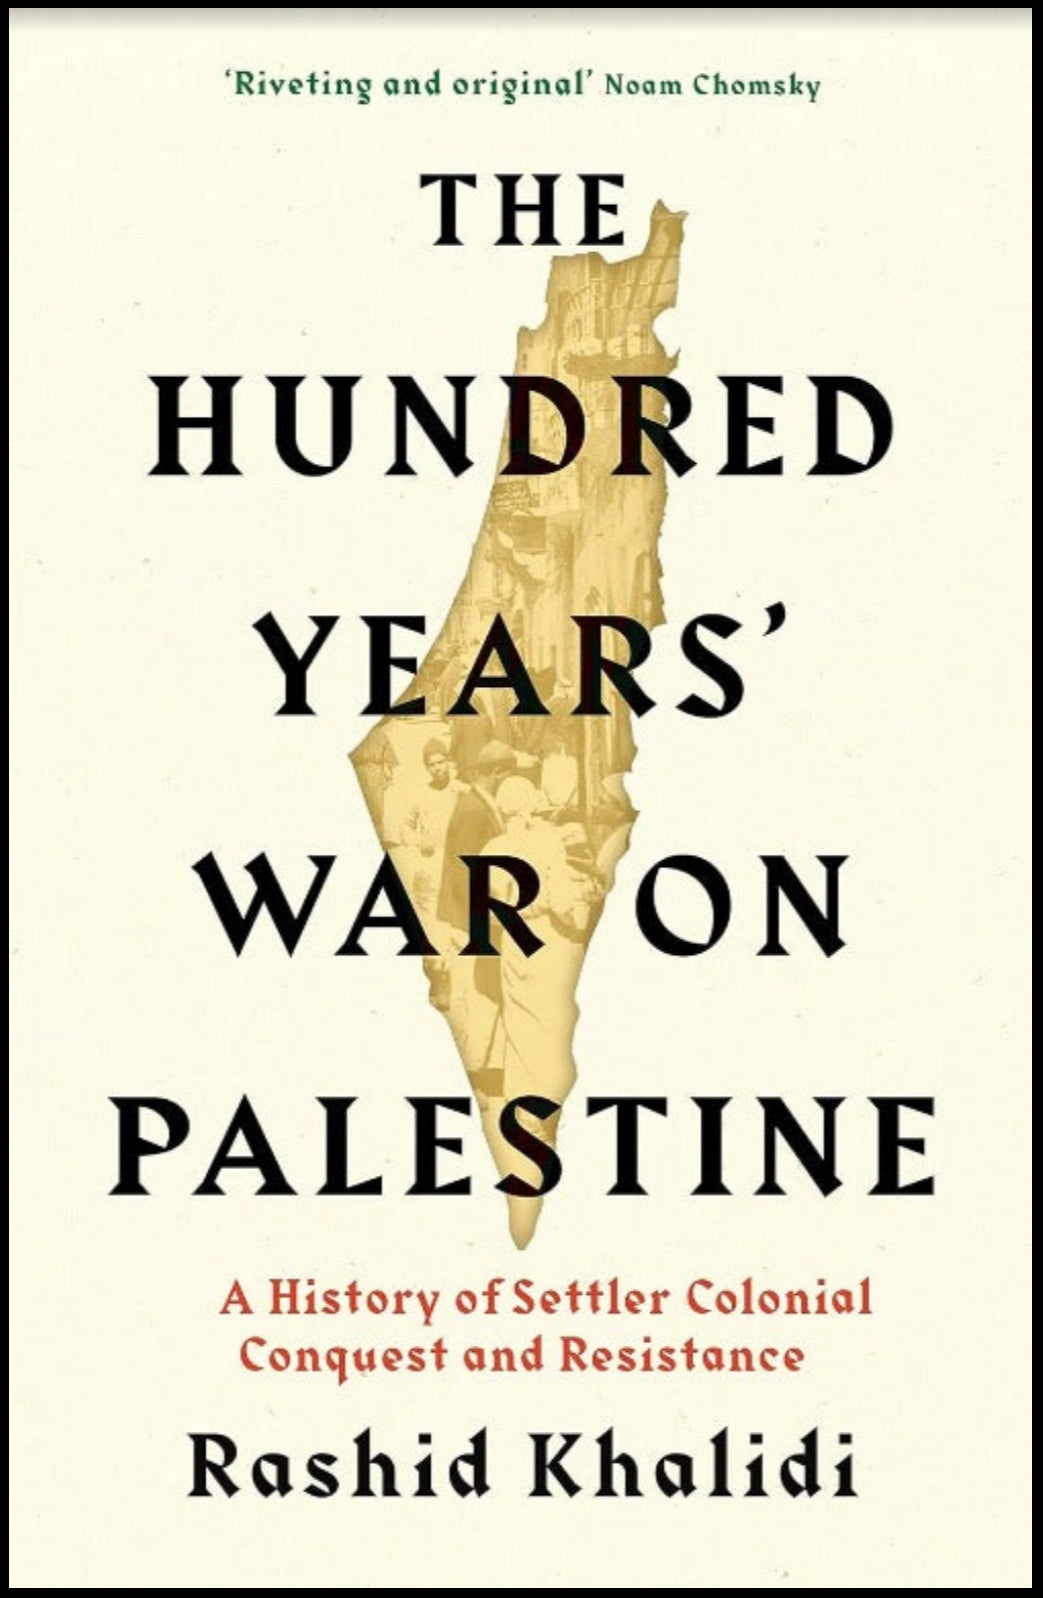 The Hundred Years' War on Palestine: A History of Settler Colonial Conquest & Resistance